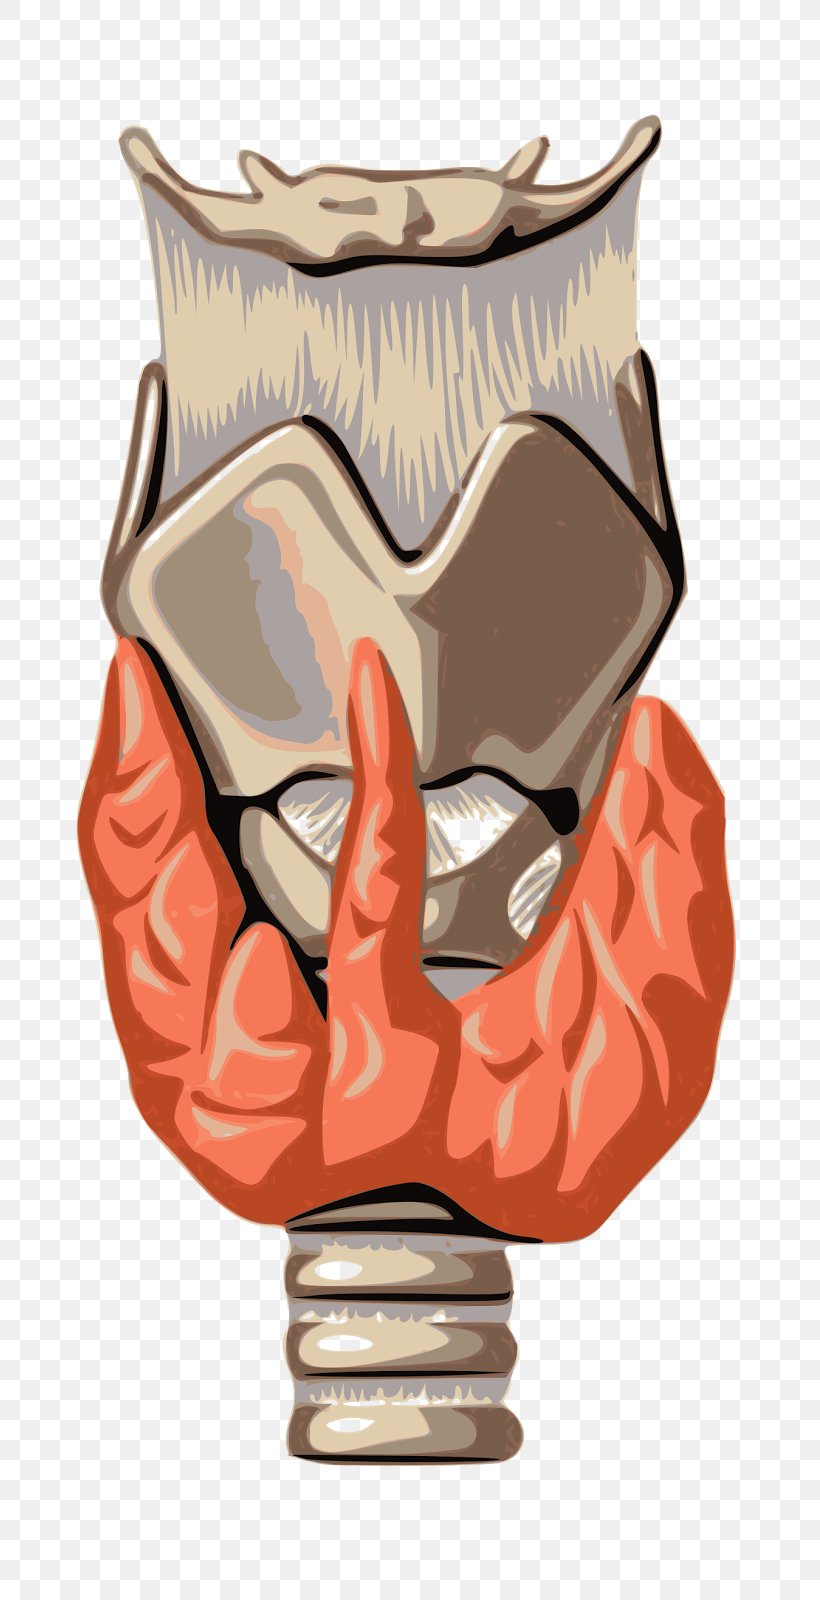 Parathyroid Gland Endocrine System Lobe, PNG, 725x1600px, Thyroid, Anatomy, Endocrine Gland, Endocrine System, Fictional Character Download Free